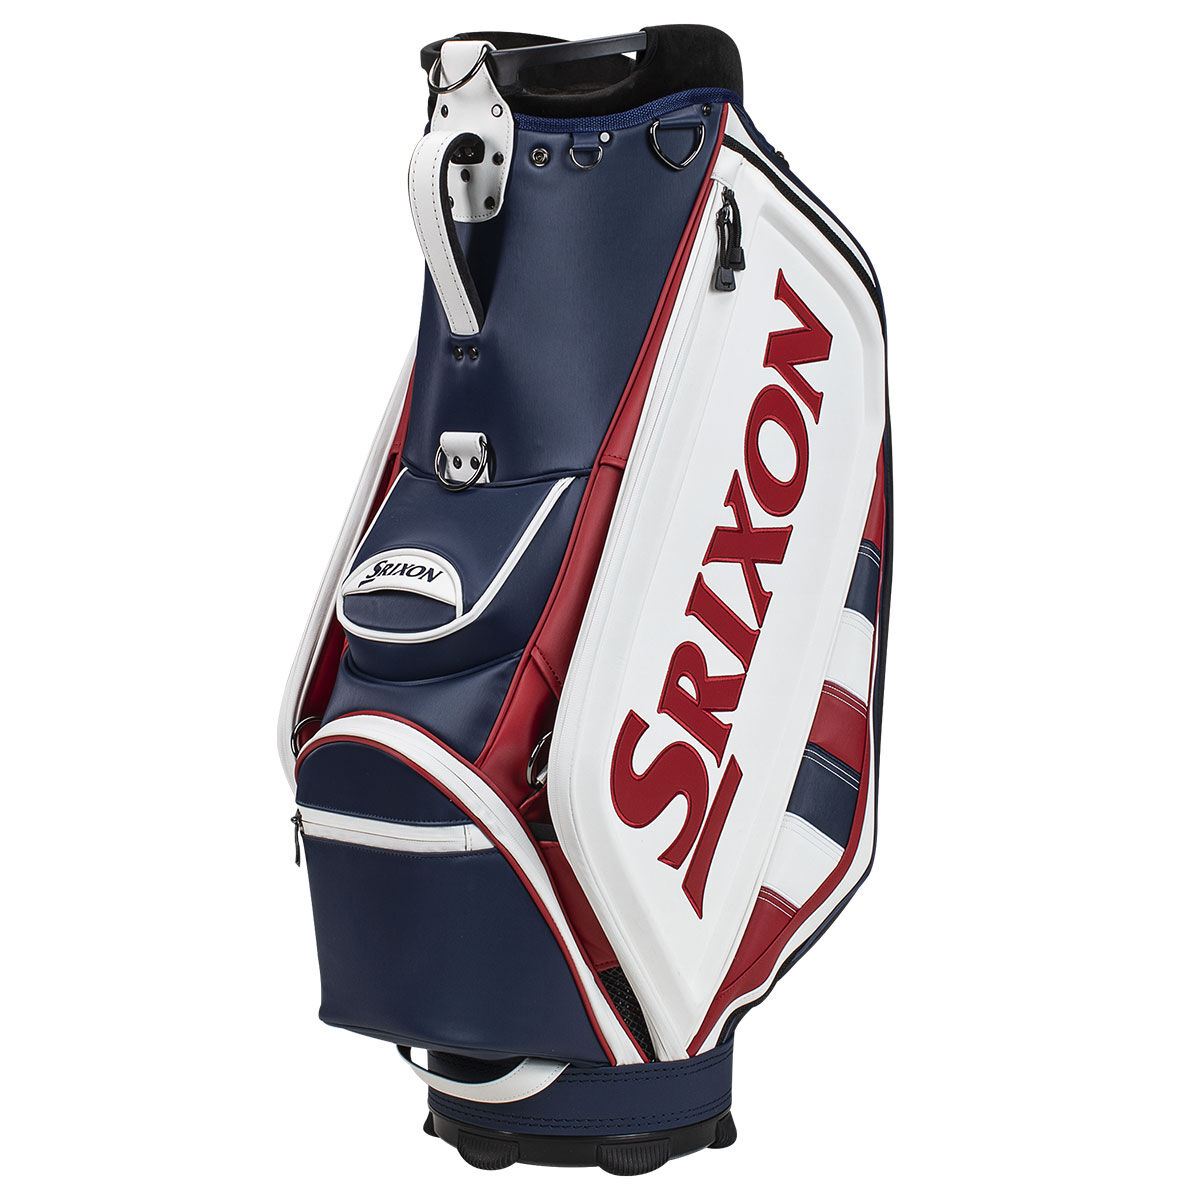 Srixon Red, White and Blue Colour Block Limited-Edition U.S. Open Tour Staff Golf Bag | American Golf, One Size